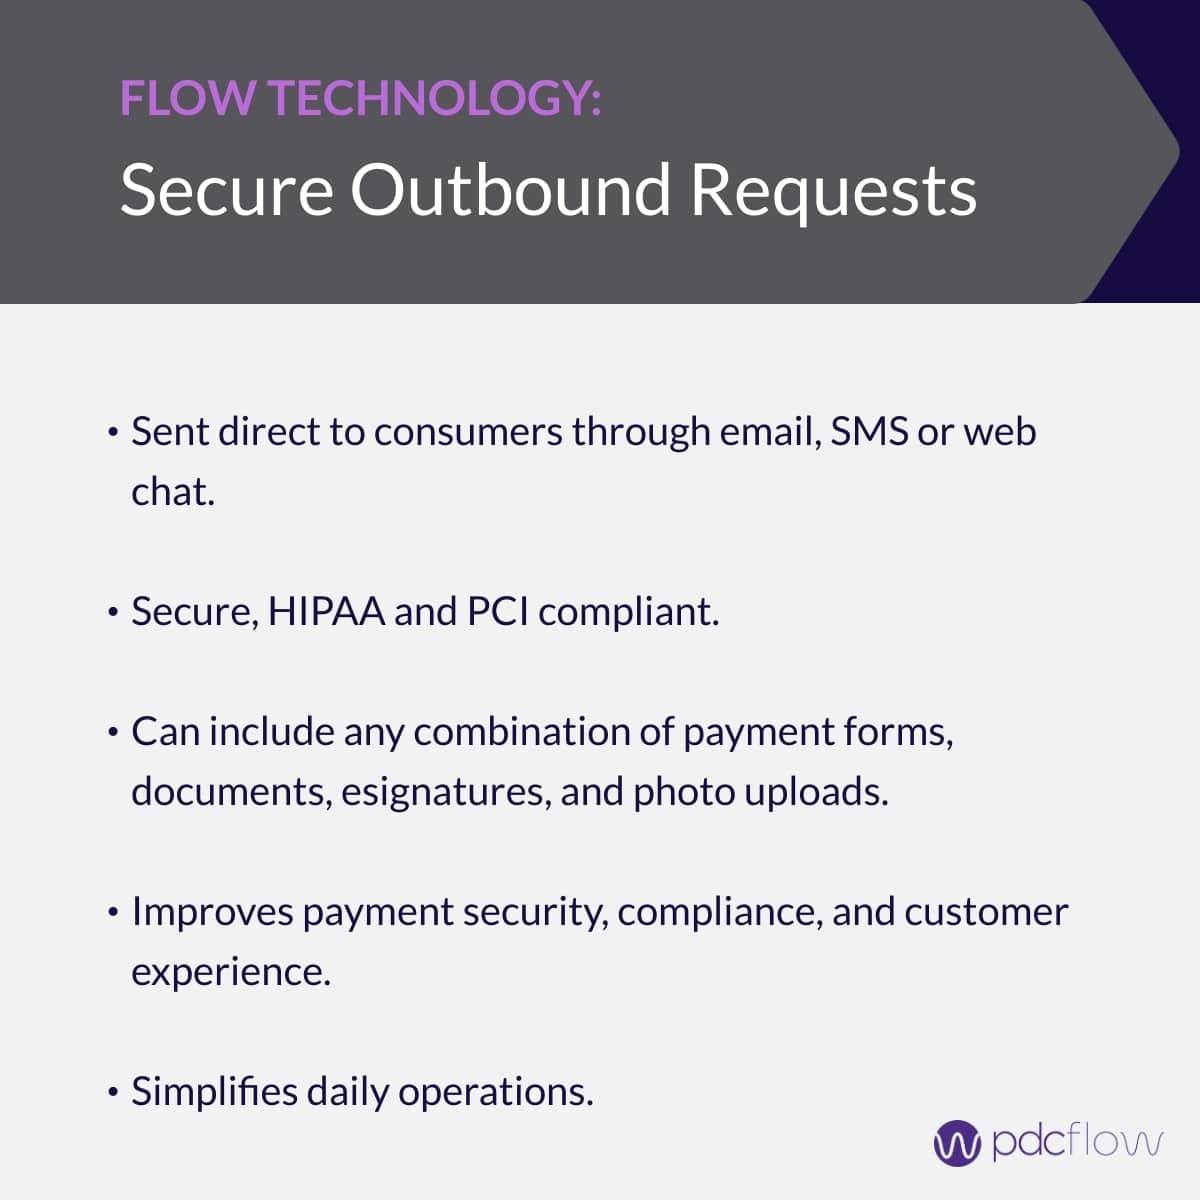 Flow Technology - Secure Outbound Requests